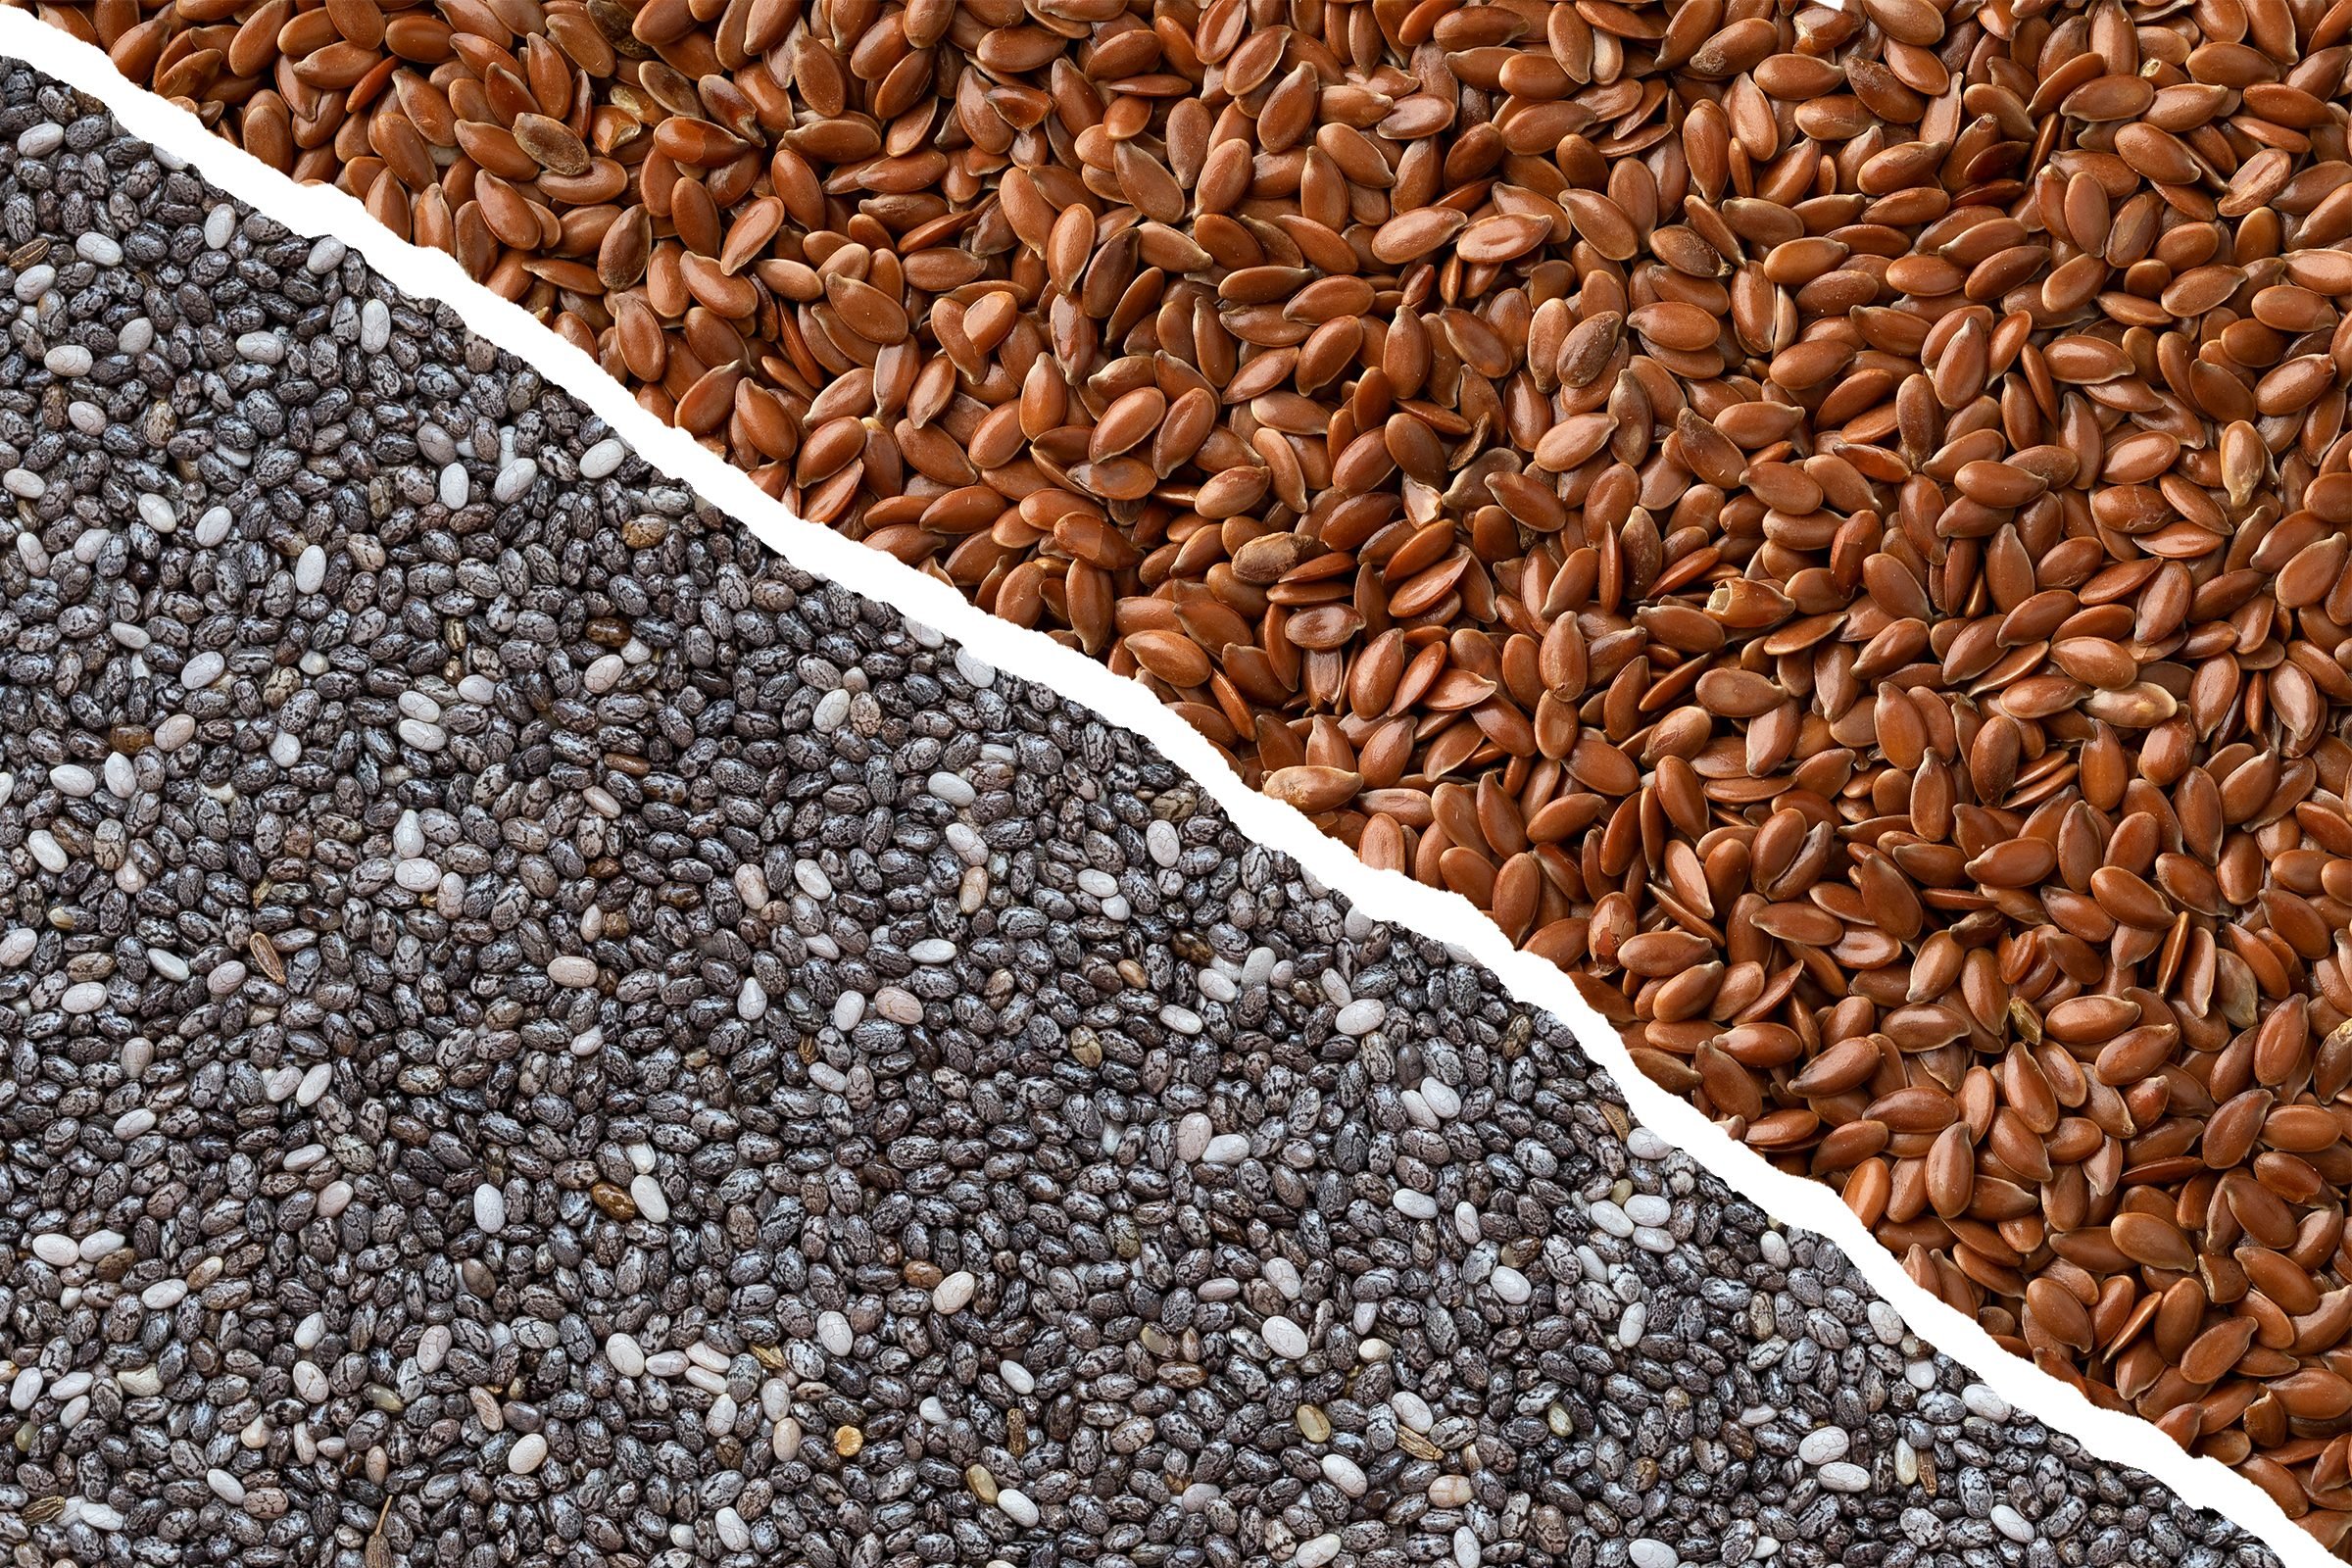 https://www.thehealthy.com/wp-content/uploads/2020/10/chia-seeds-vs-flaxseeds-1.jpg